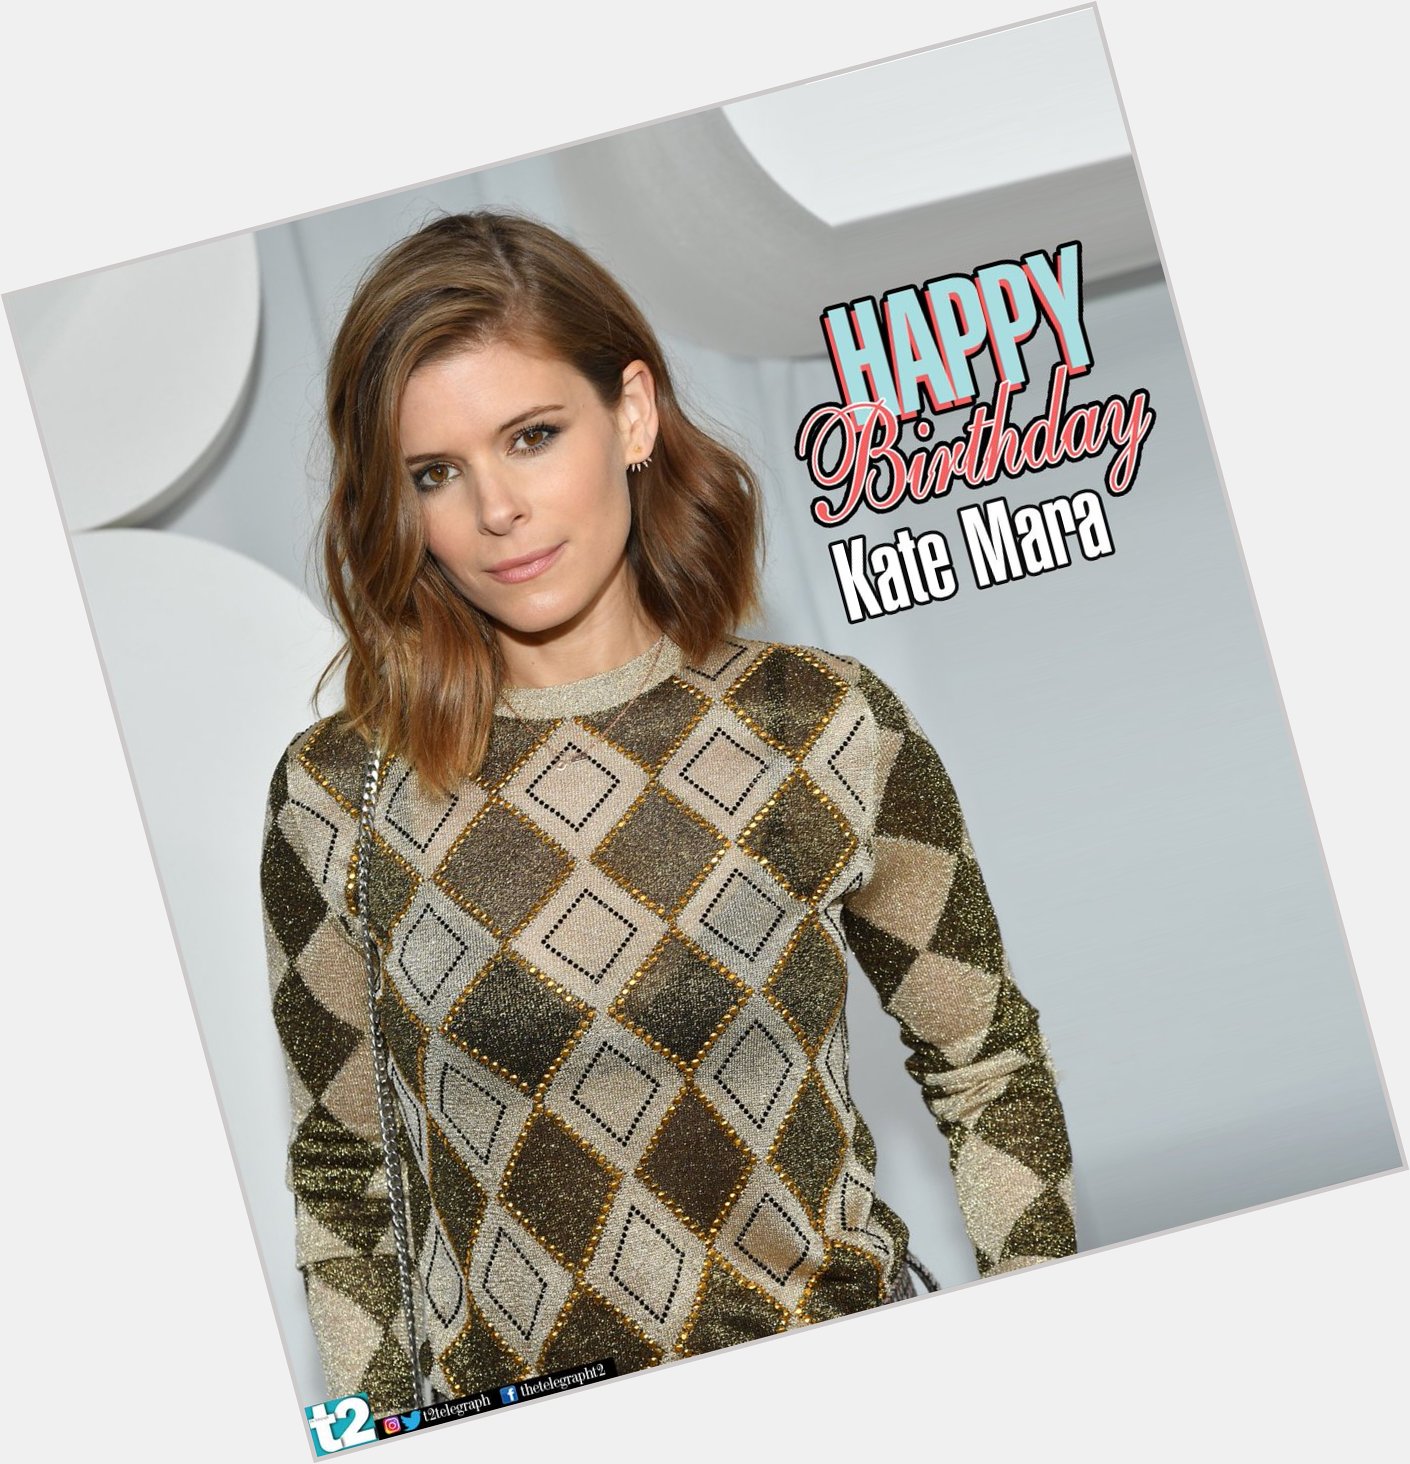 Spunky, stylish... she\s all this and more. t2 wishes a very happy birthday to Kate Mara! 